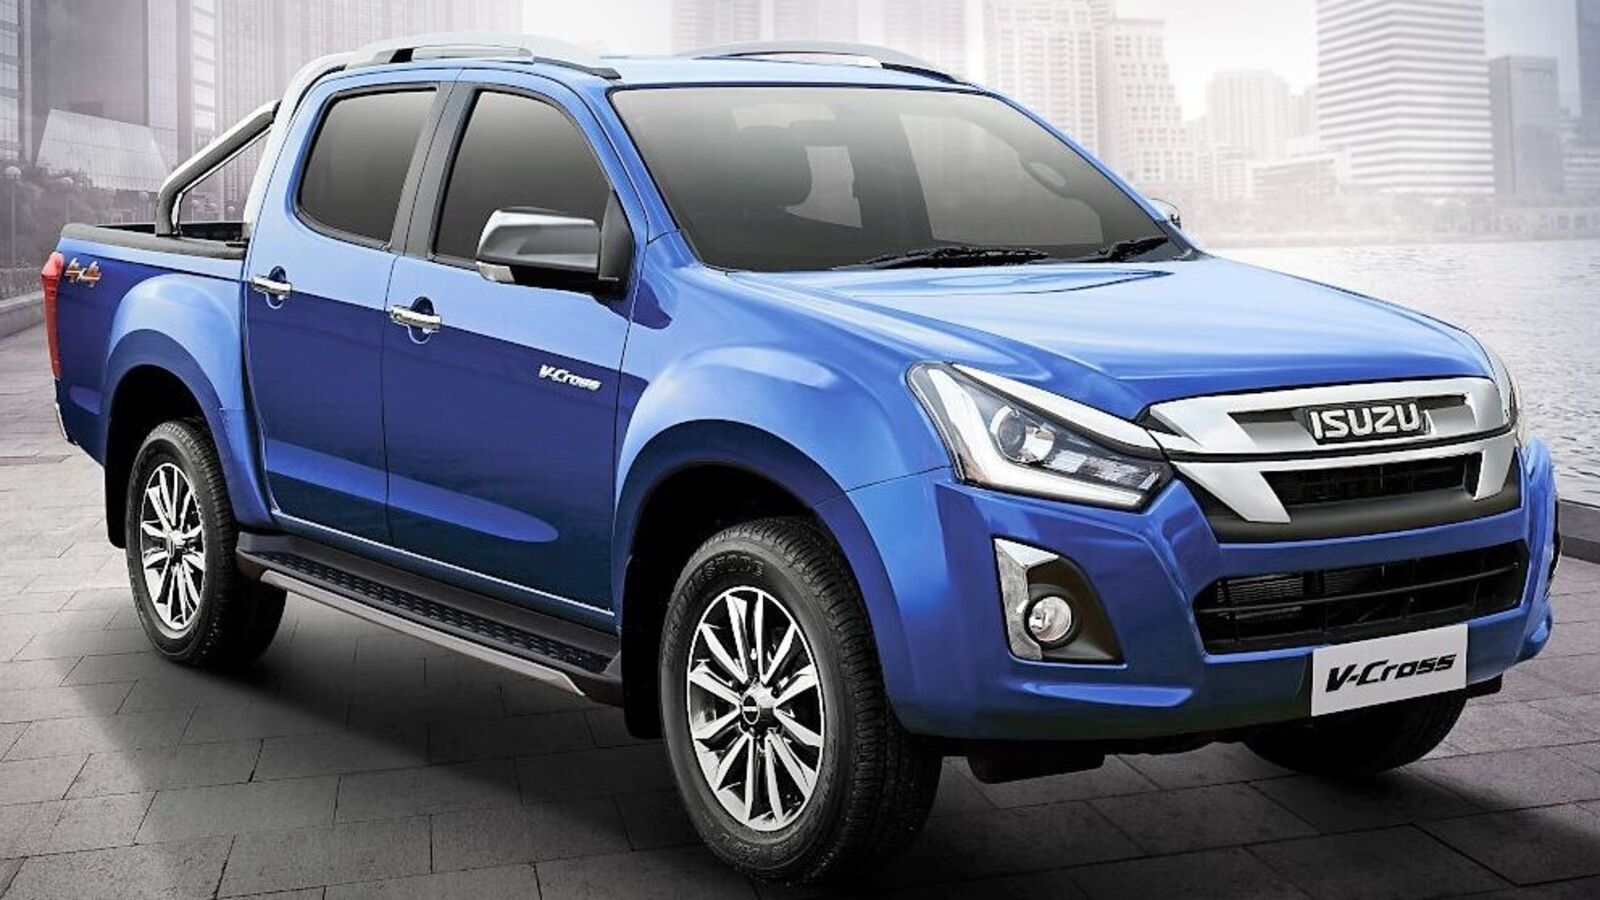 Isuzu V-Cross becomes costlier in India ahead of Hilux launch